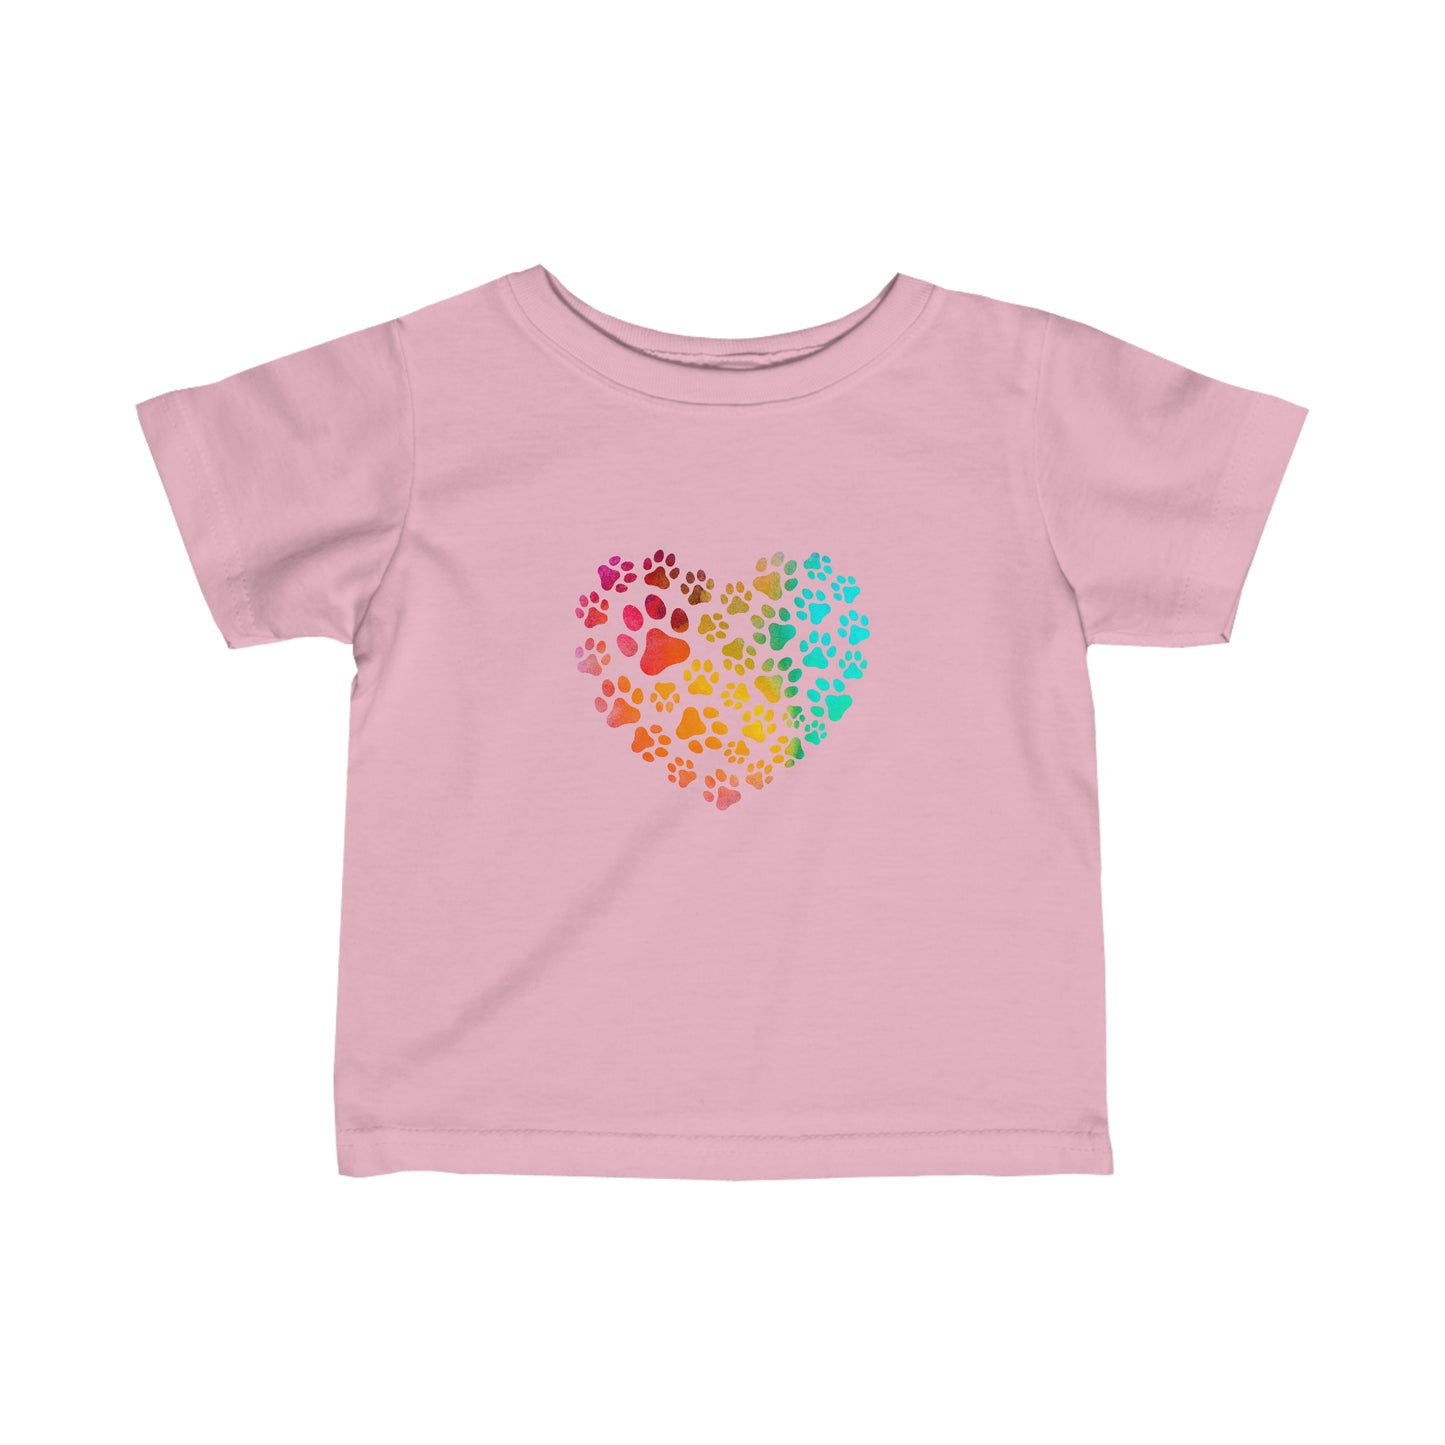 Art, Colorful, Love, Dog Paw- Baby, Infant, Toddler, T-shirt